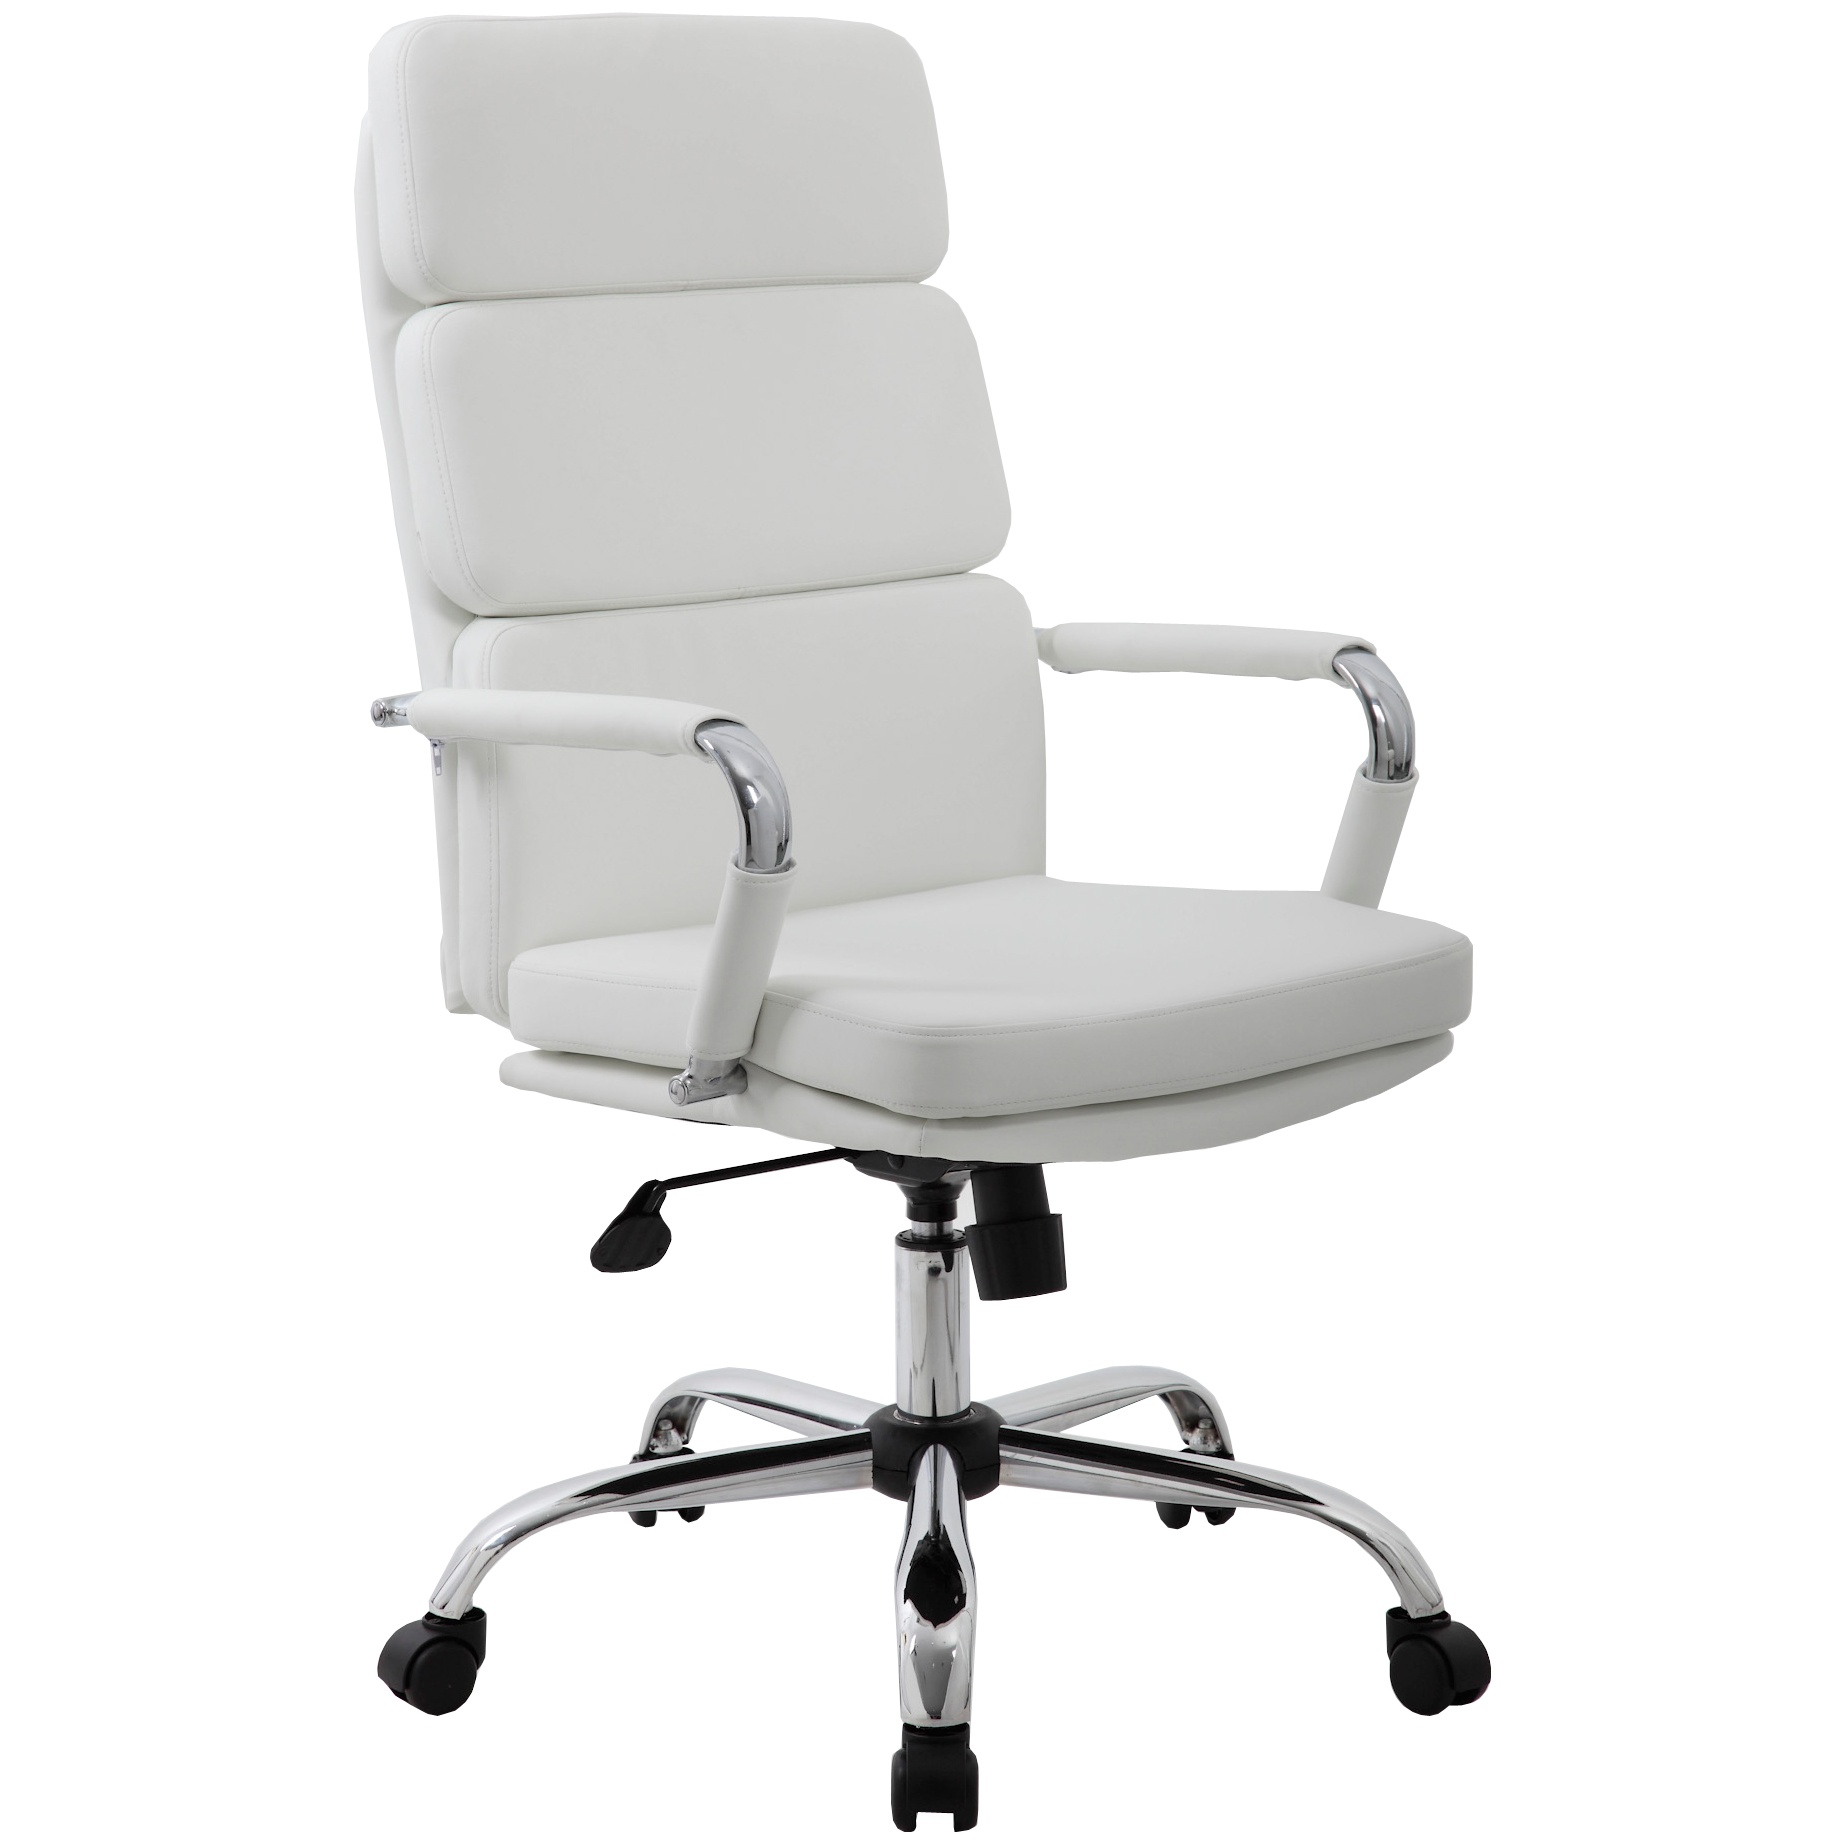 Ava White Executive Office Chairs, White Leather Office Chairs Uk